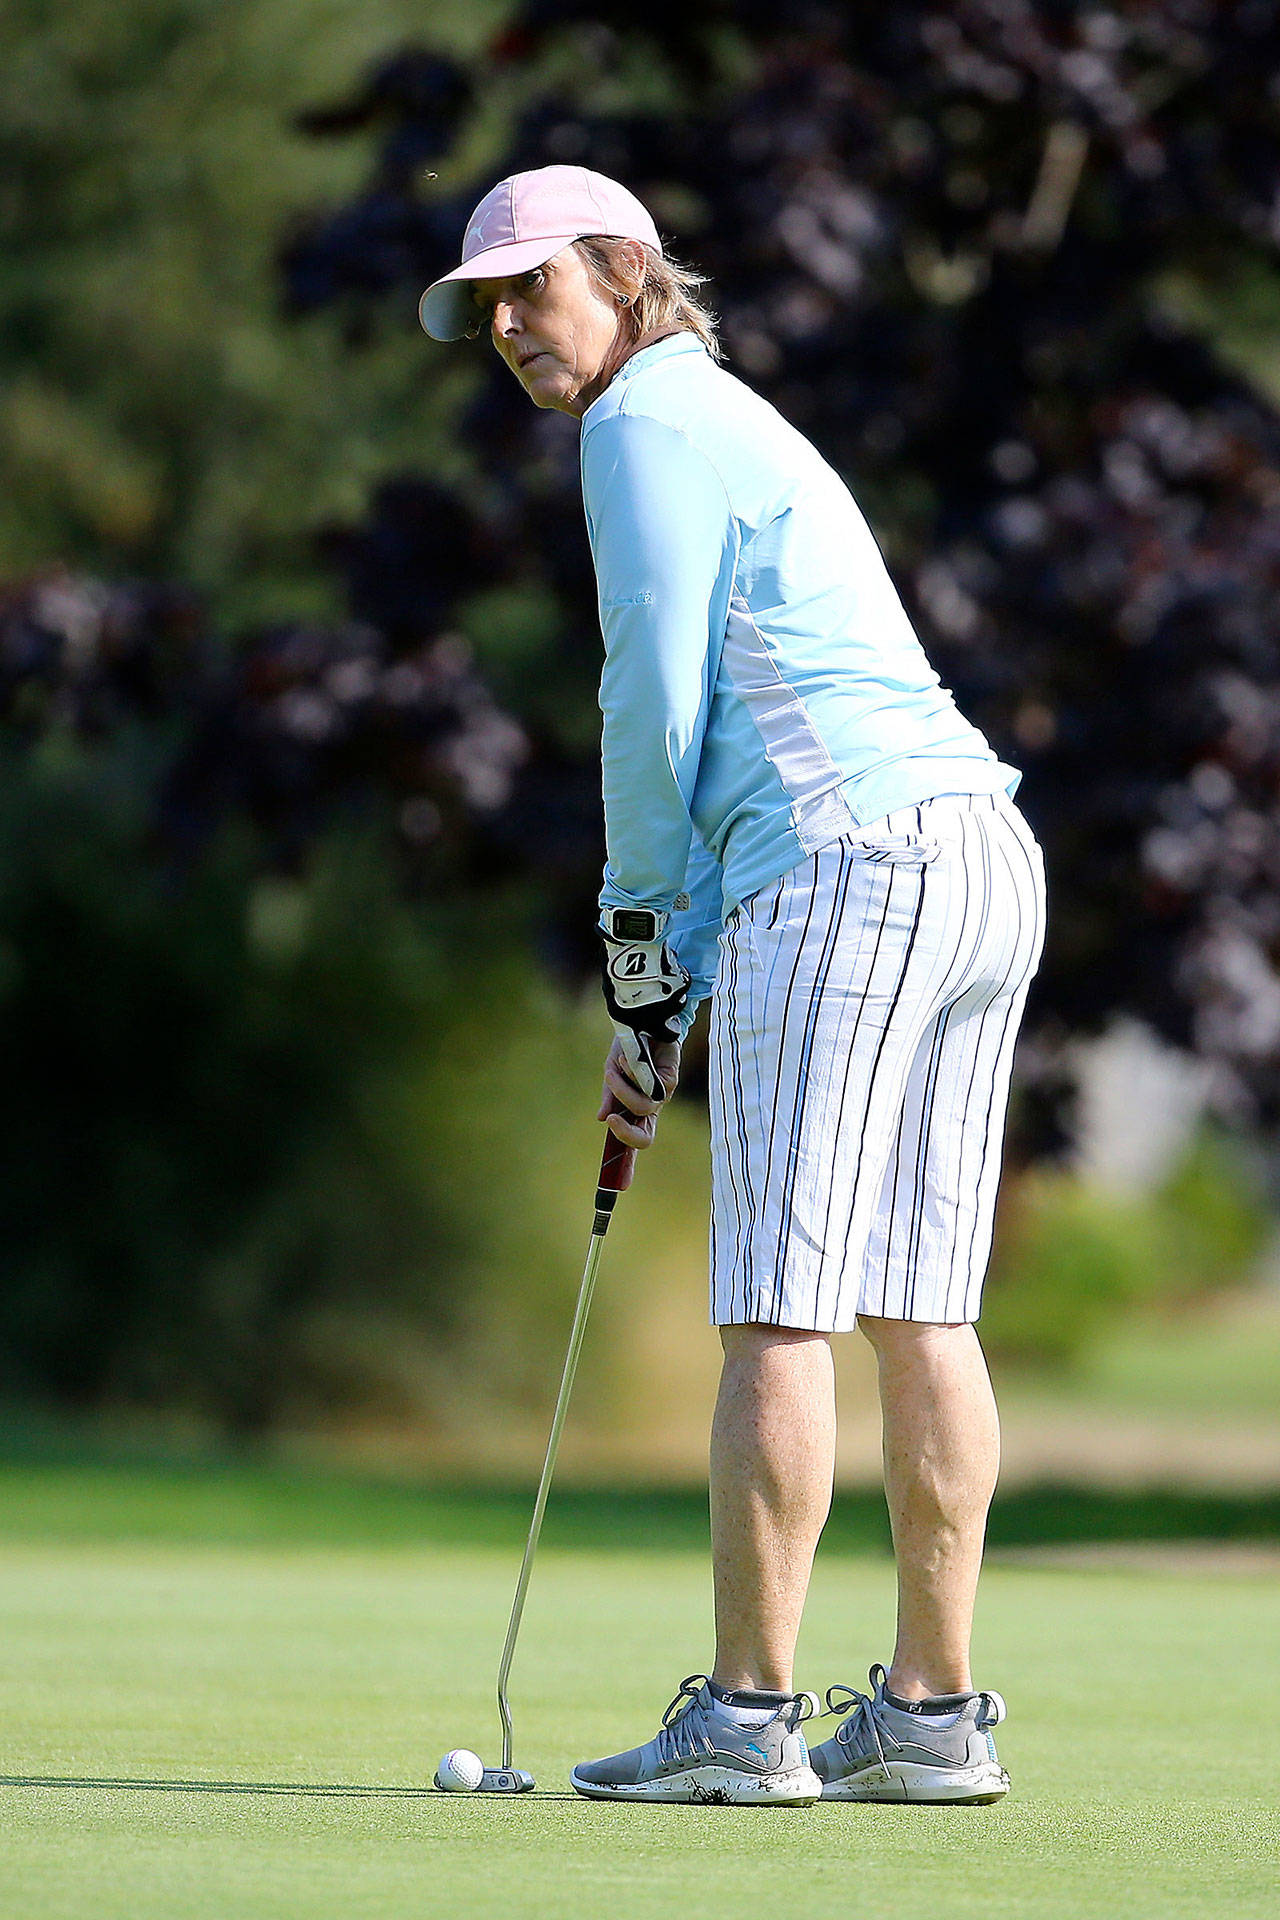 Mimi Boomersbach scopes out a putt in the par-3 tournament. (Photo by John Fisken)